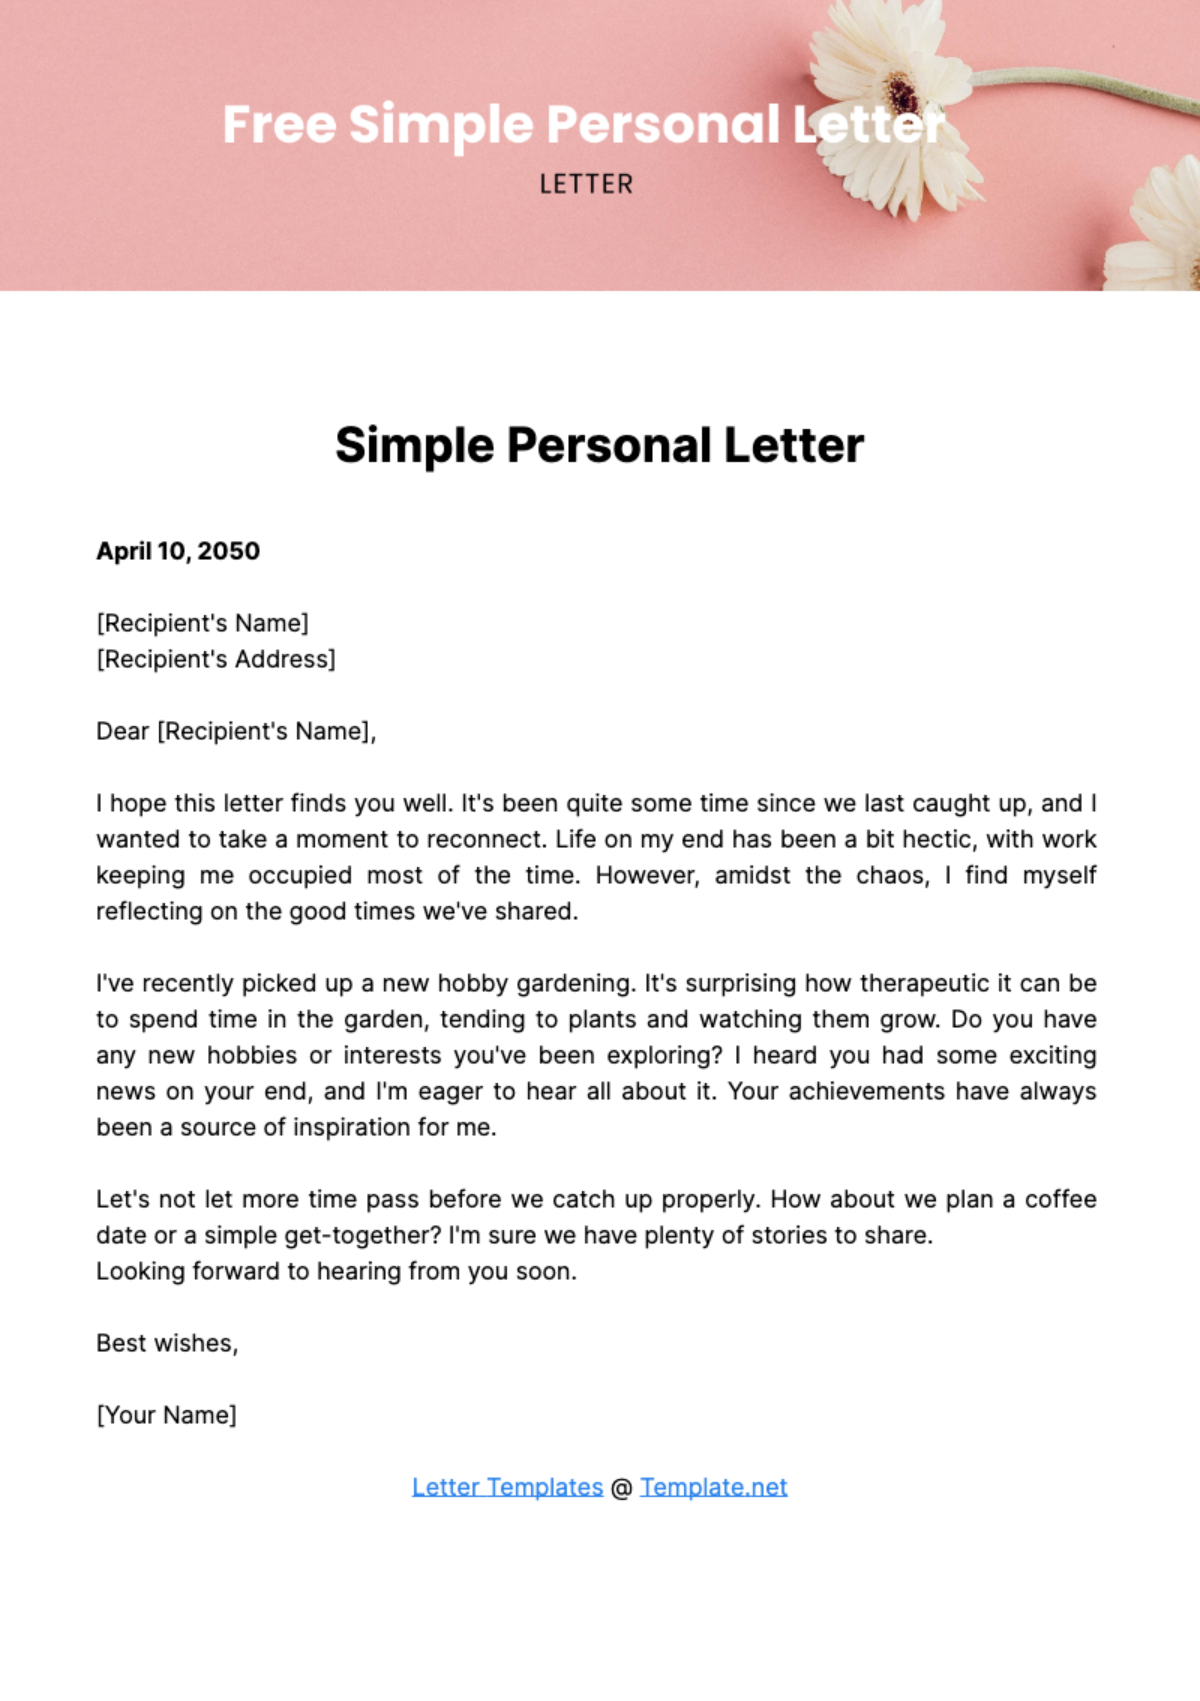 Free Simple Personal Letter Template